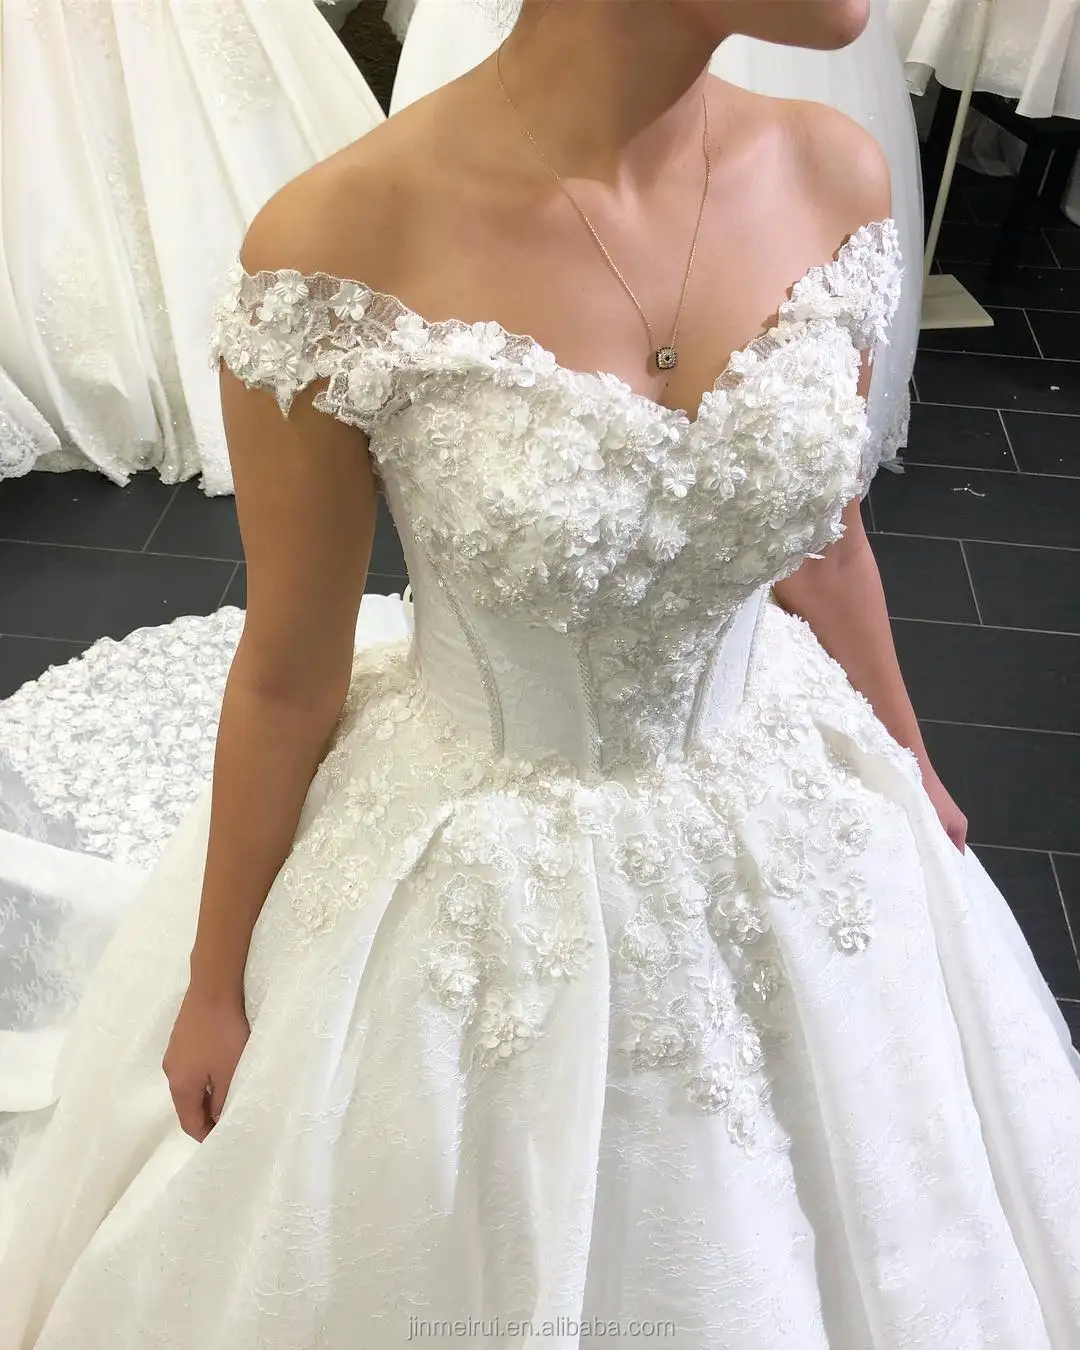 Luxury Lifestyle Cinderella Wedding Gown Sweetheart Couture Bodice 2 Lace With 3d Flowers Ball Gown Wedding Dresses Vestidos De Buy Cinderella Wedding Gown Wedding Dress Bridal Gown Product On Alibaba Com